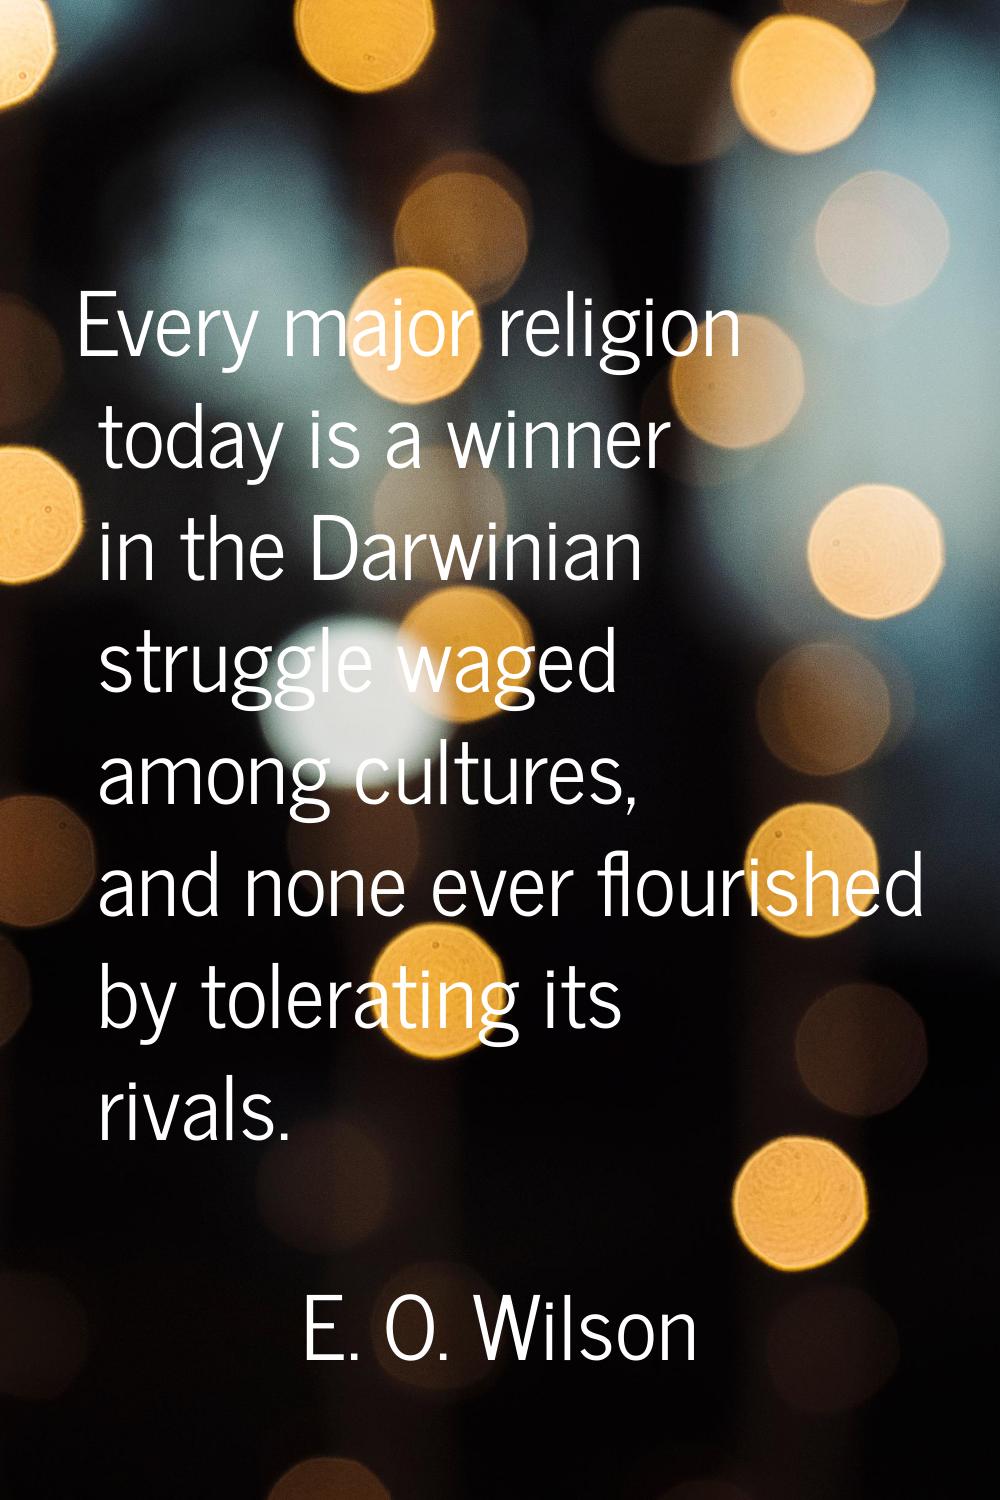 Every major religion today is a winner in the Darwinian struggle waged among cultures, and none eve